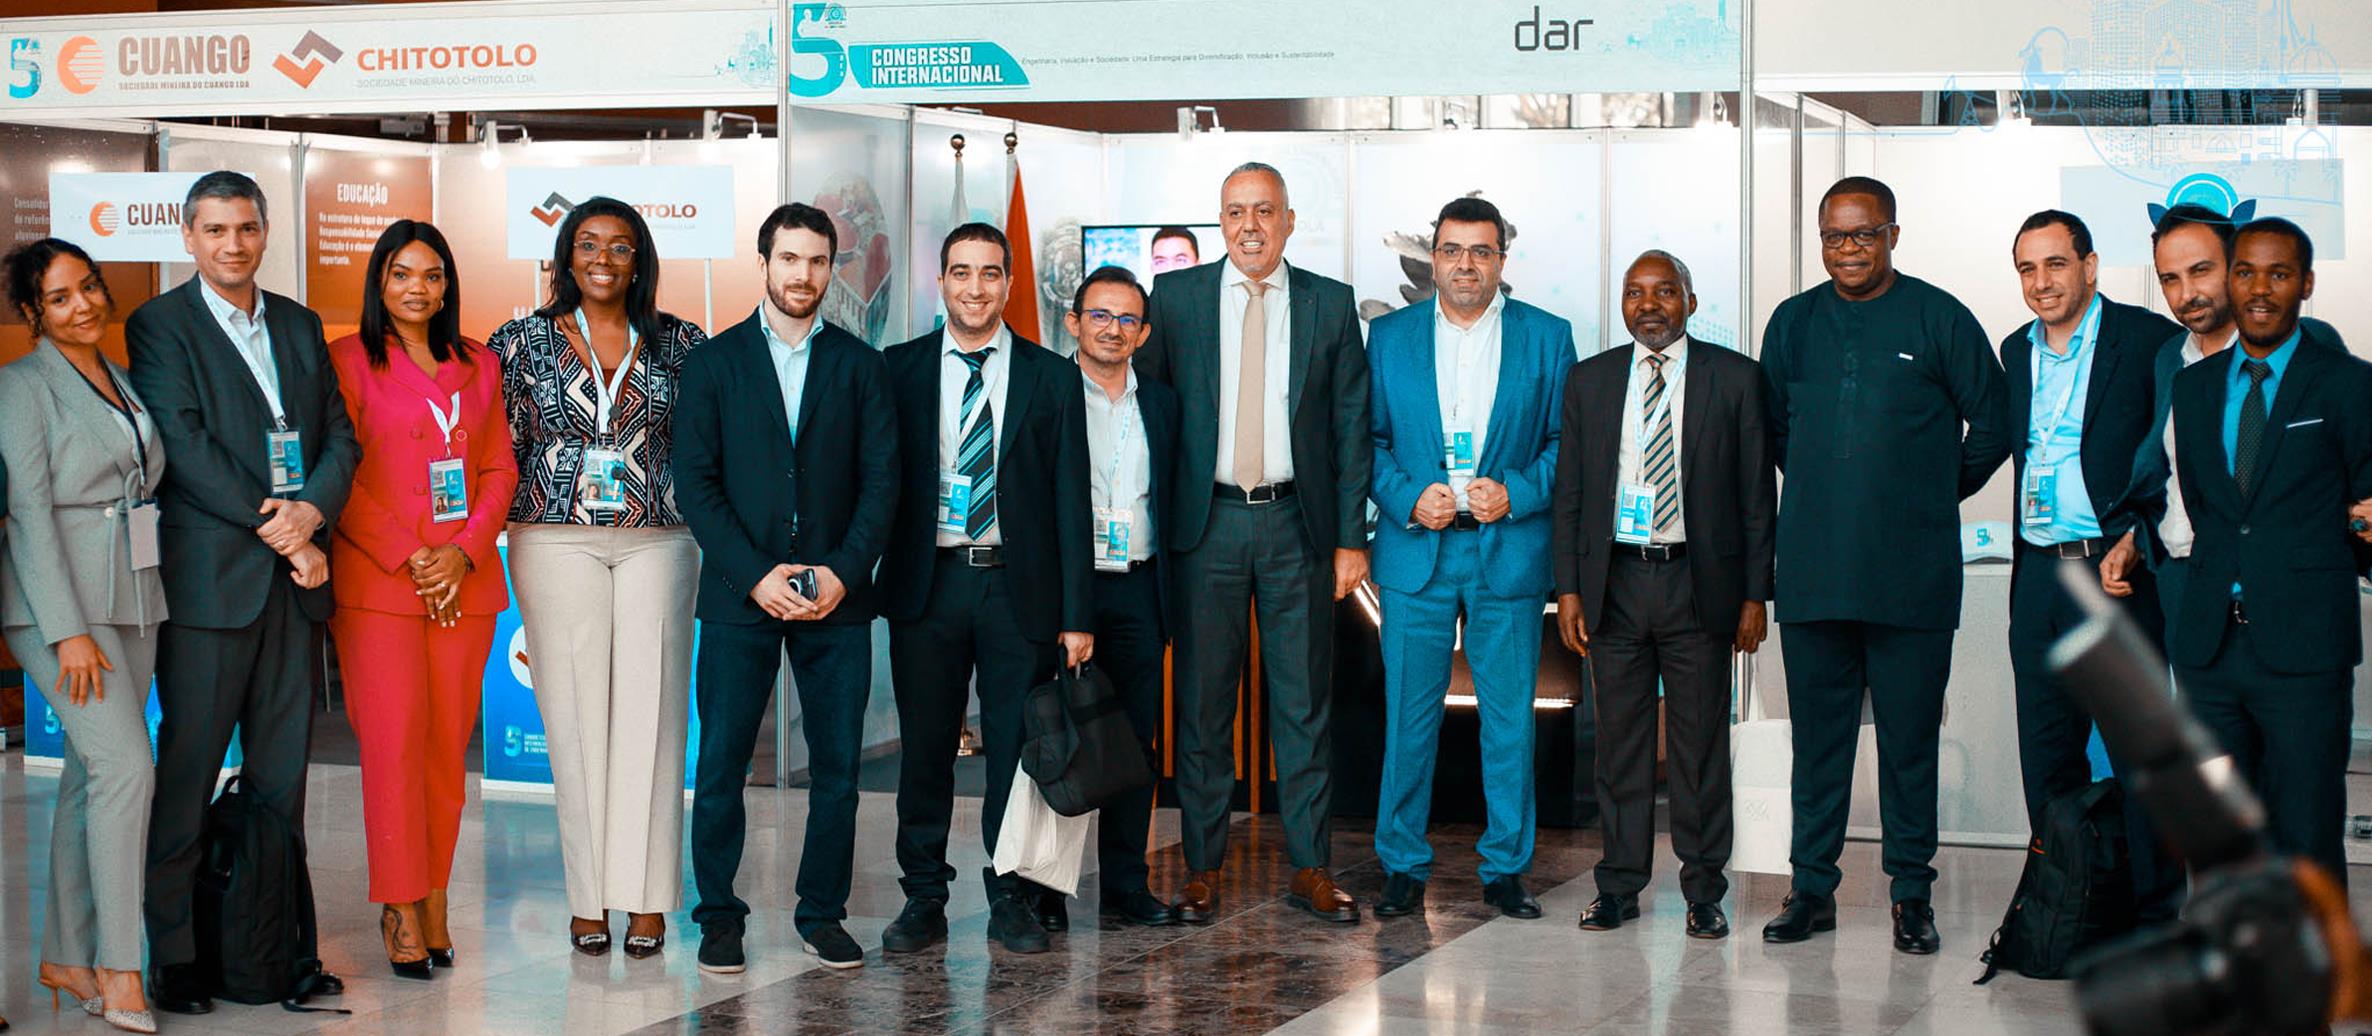 The 5th International Congress of the Order of Engineers of Angola spotlights Dar and Para 